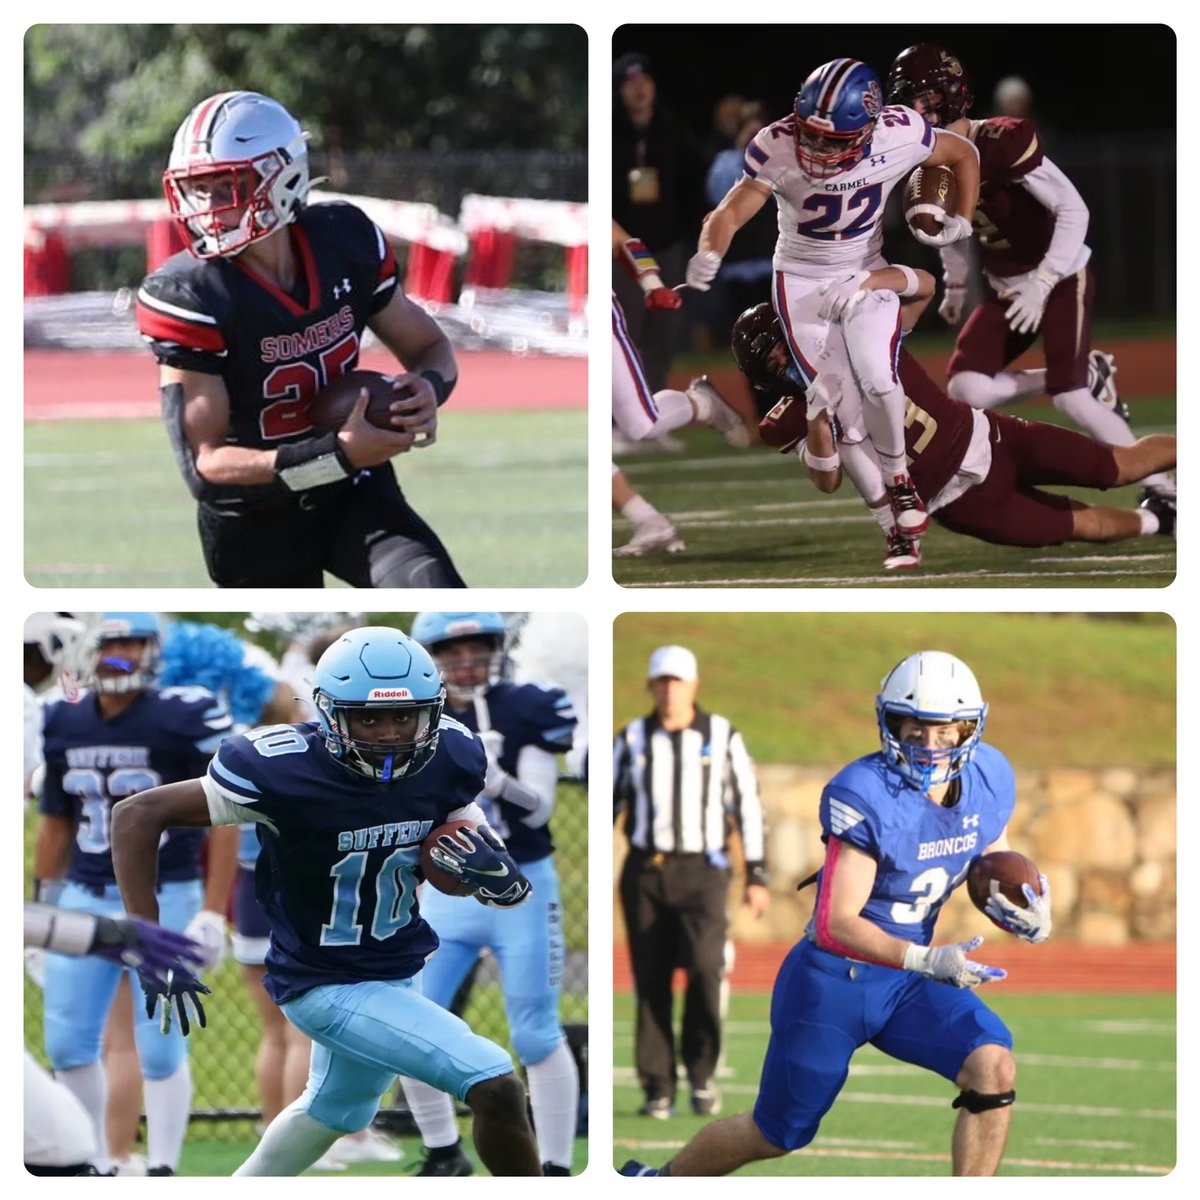 Frank’s Film Room is back with some NEW RB breakdowns. Check out our videos on the 4 below athletes -Mason Kelly (Somers) -Tristan Werlau (Carmel) -Jep Joseph (Suffern) -Davis Patterson (Bronxville) 🔗 youtube.com/@famsportsny13…